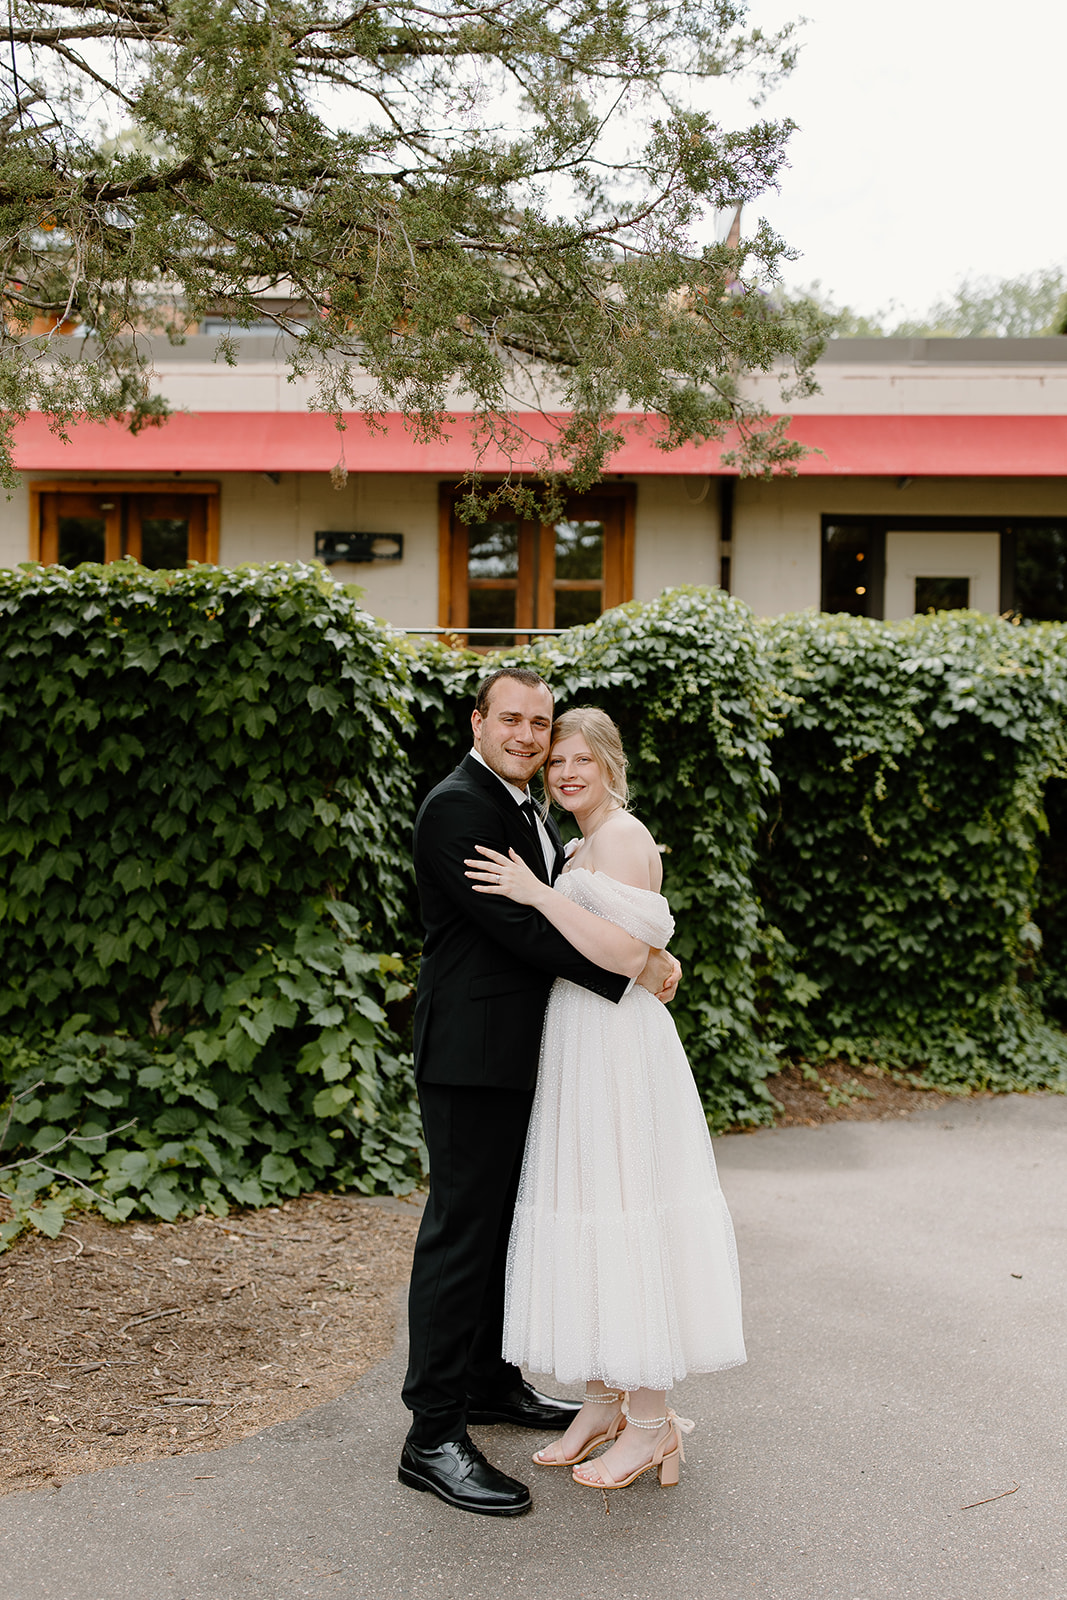 Bride and groom hold each other and smile in front of a wall of vines